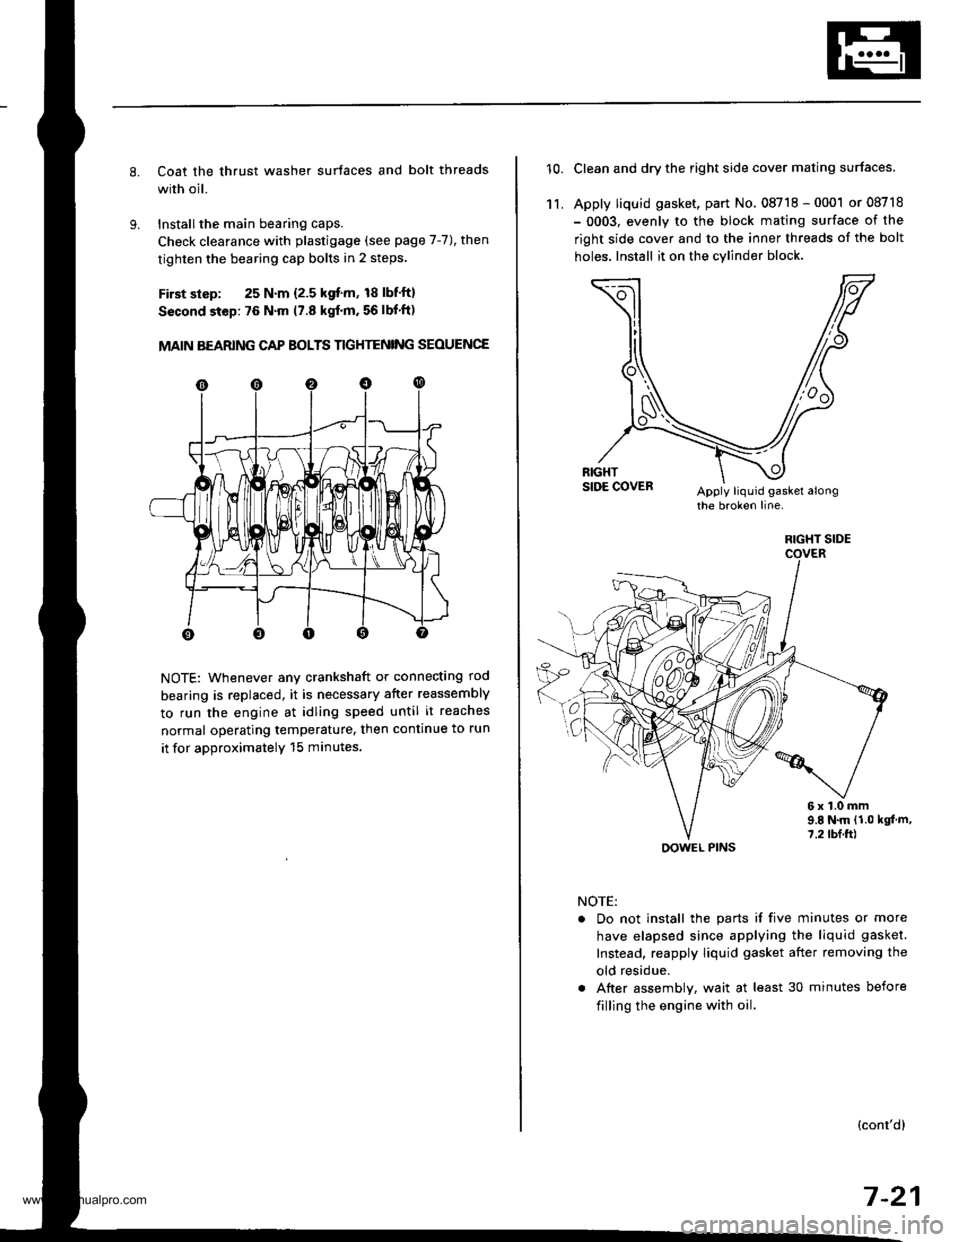 HONDA CR-V 1997 RD1-RD3 / 1.G Workshop Manual 
Coat the thrust washer surtaces and bolt threads
with oil.
Installthe main bearing caps.
Check clearance with plastigage (see page 7-7), then
tighten the bearing cap bolts in 2 steps.
First slsp: 25 